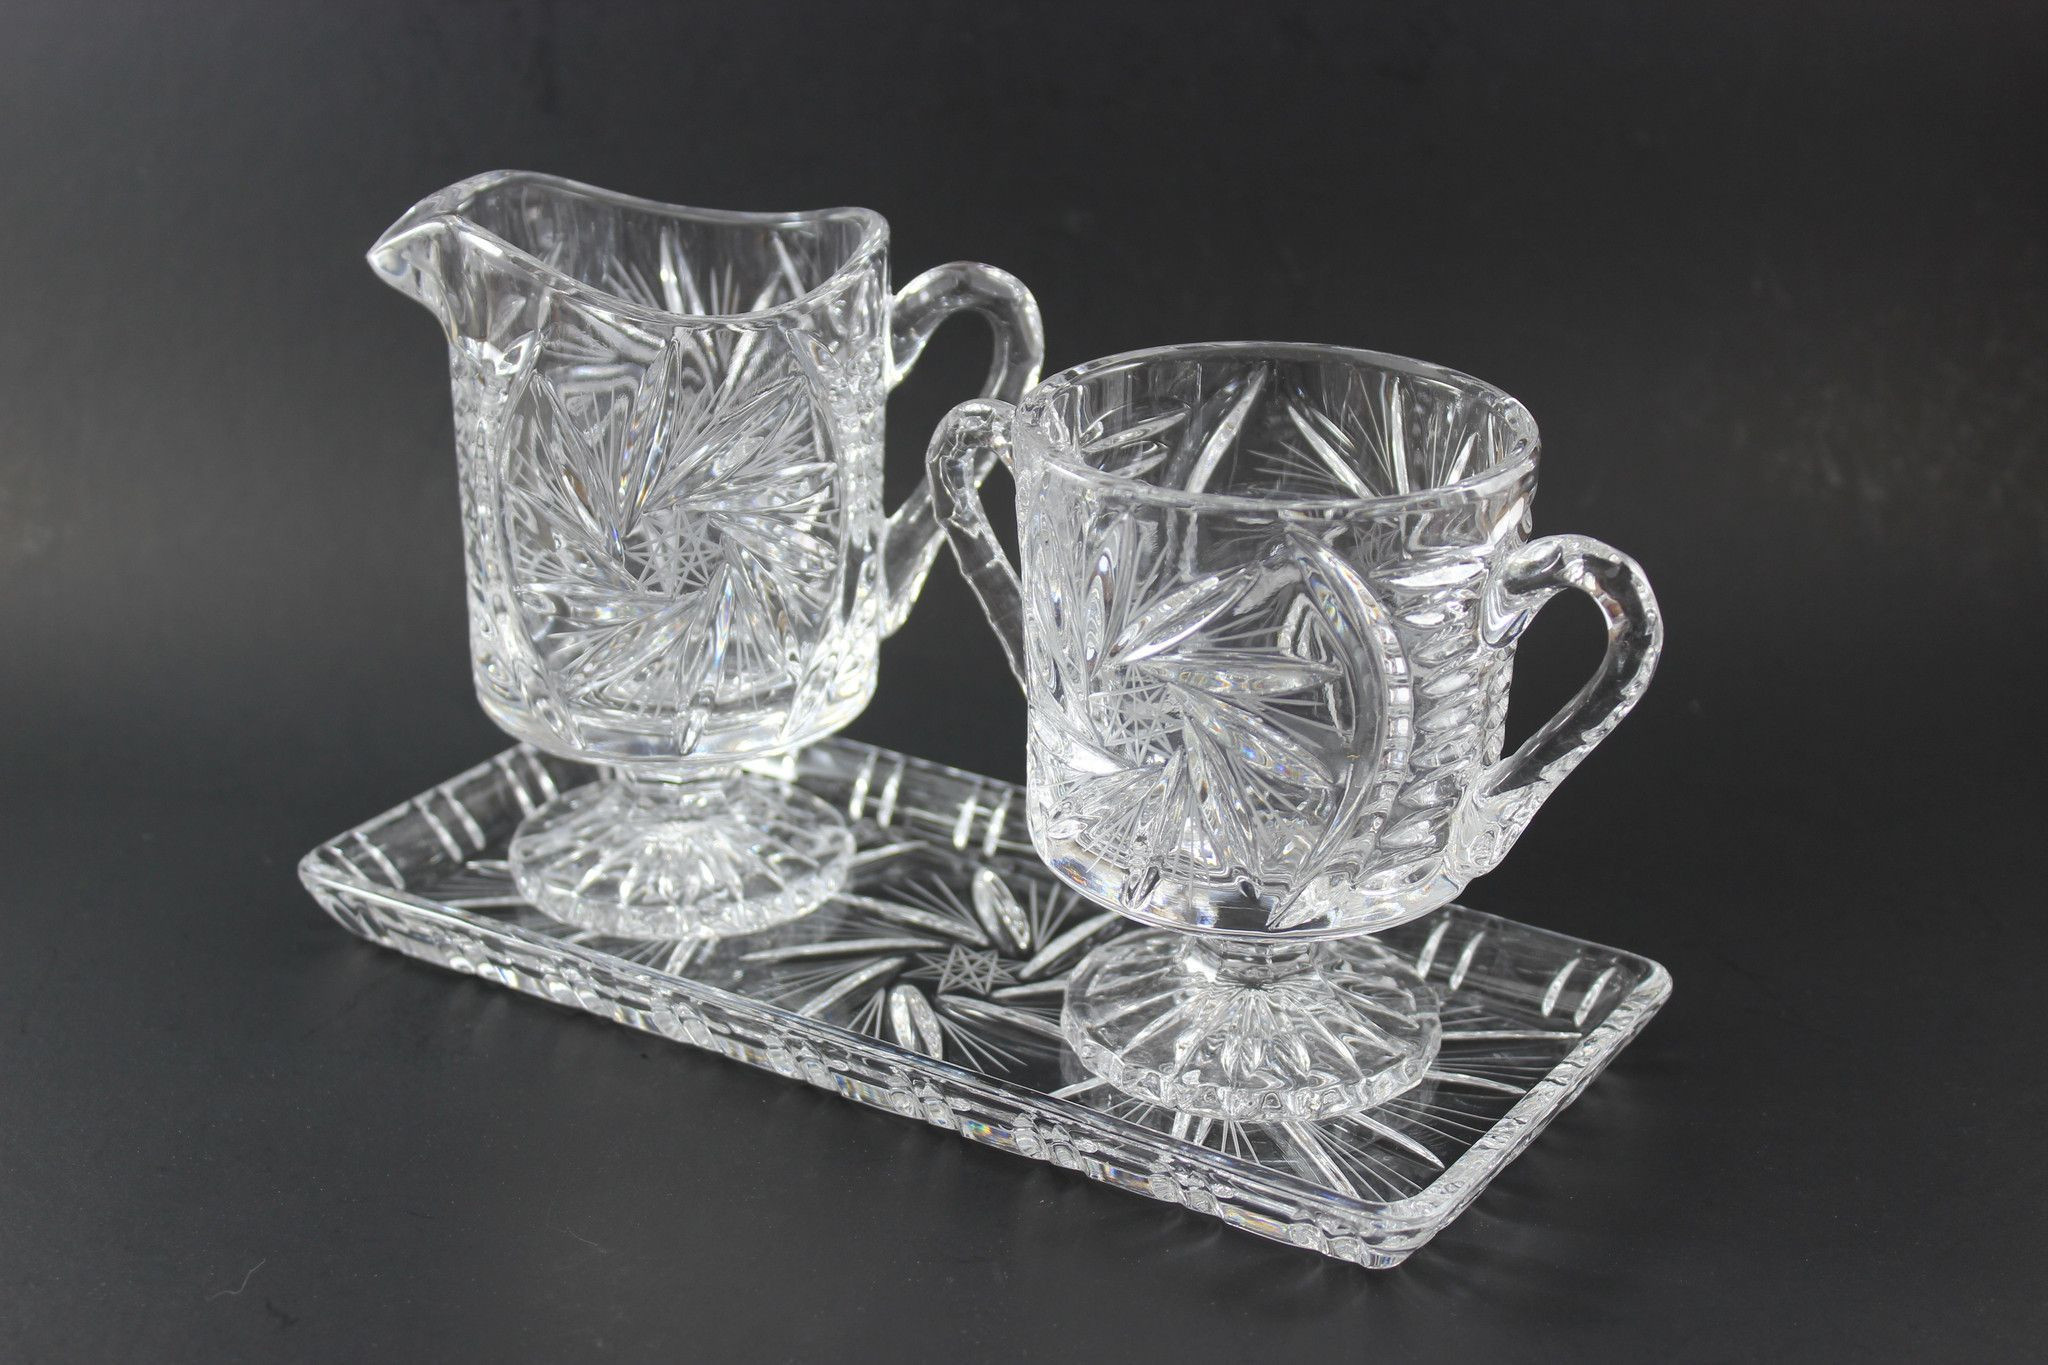 21 Unique Waterford Lismore Candy Bud Vase 2024 free download waterford lismore candy bud vase of pinwheel crystal large cream sugar and tray cream and sugar set pertaining to pinwheel crystal large cream sugar and tray